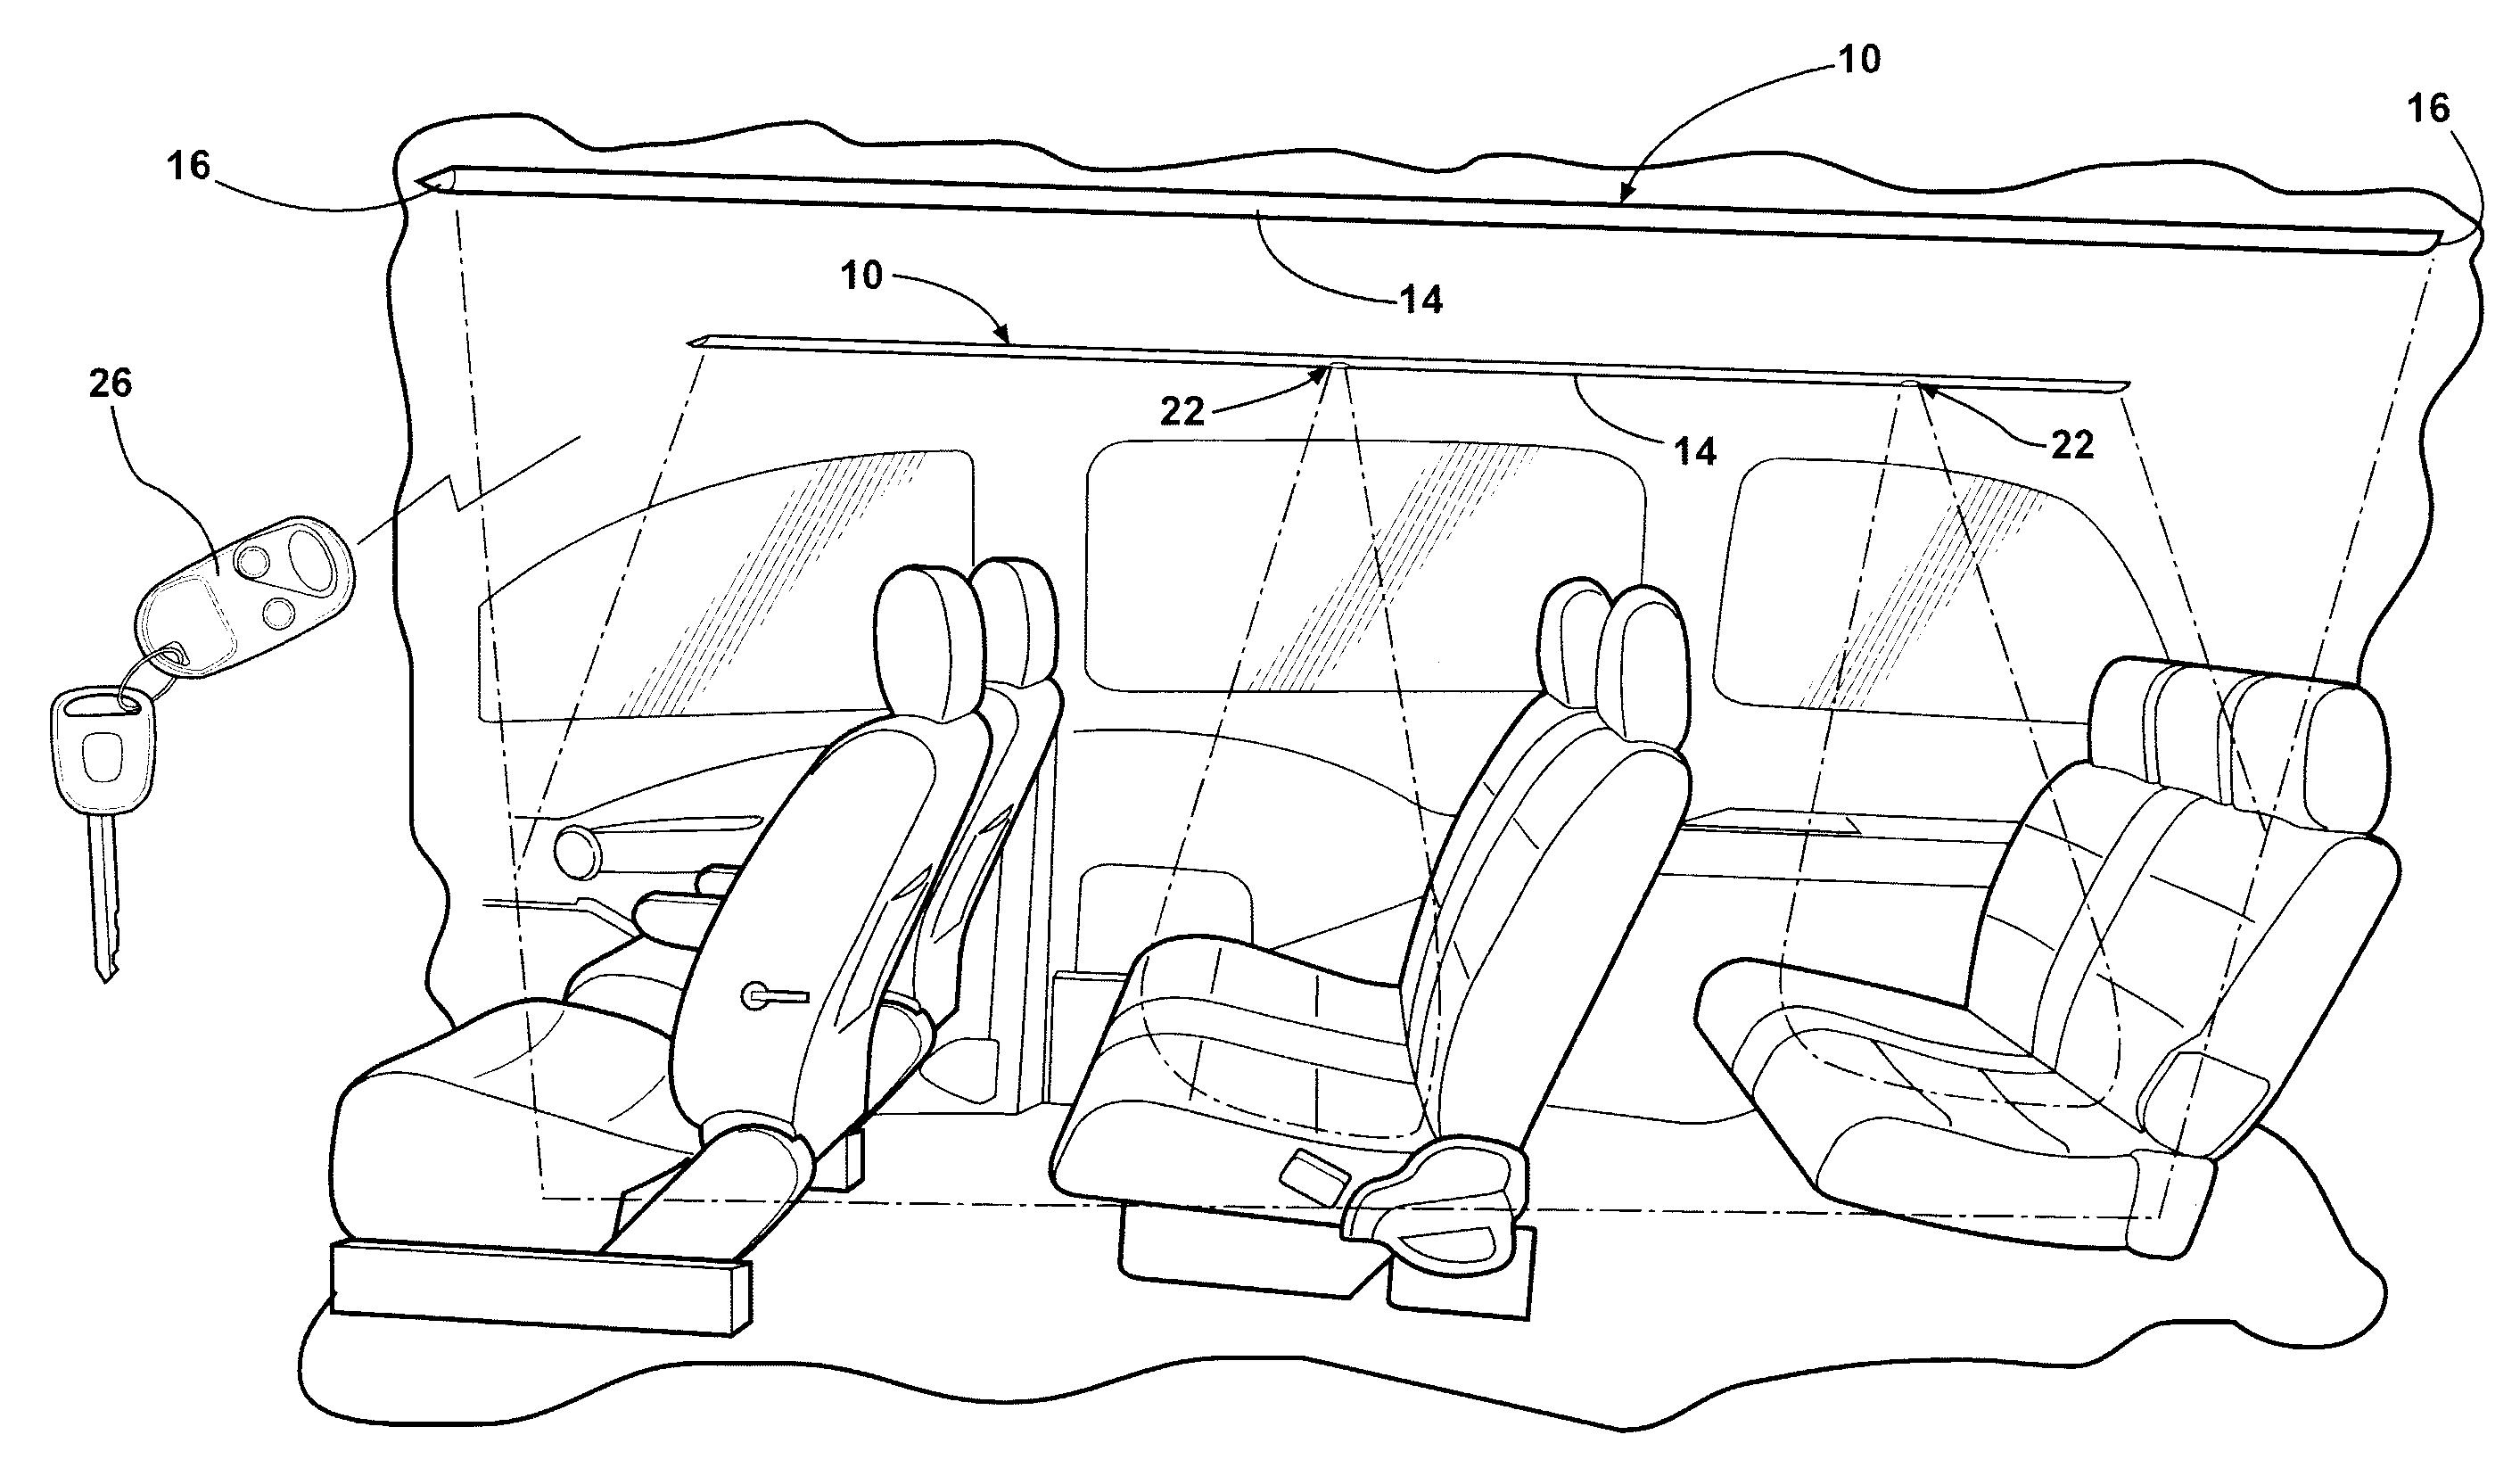 Transitional lighting system for vehicle interior